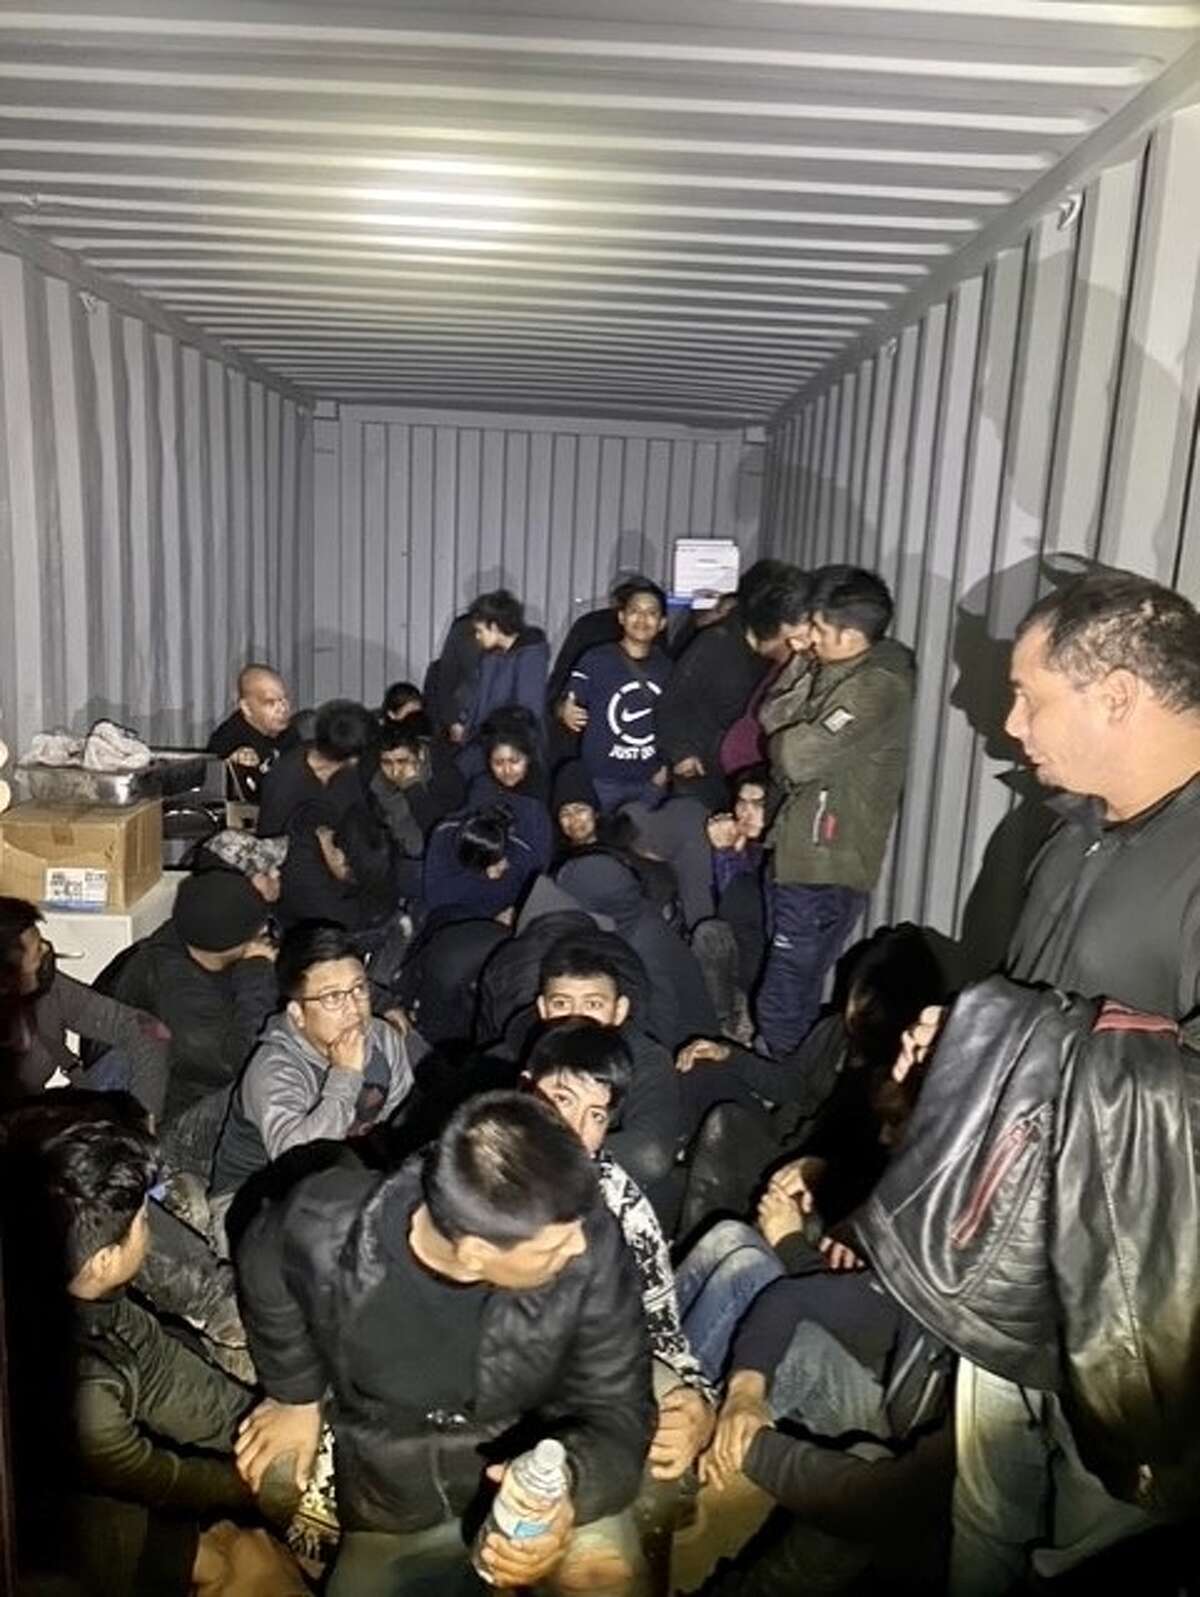 The Texas Department of Public Safety apprehended more than 50 migrants and recovered a stolen semi trailer while working Operation Lone Star on Nov. 28.